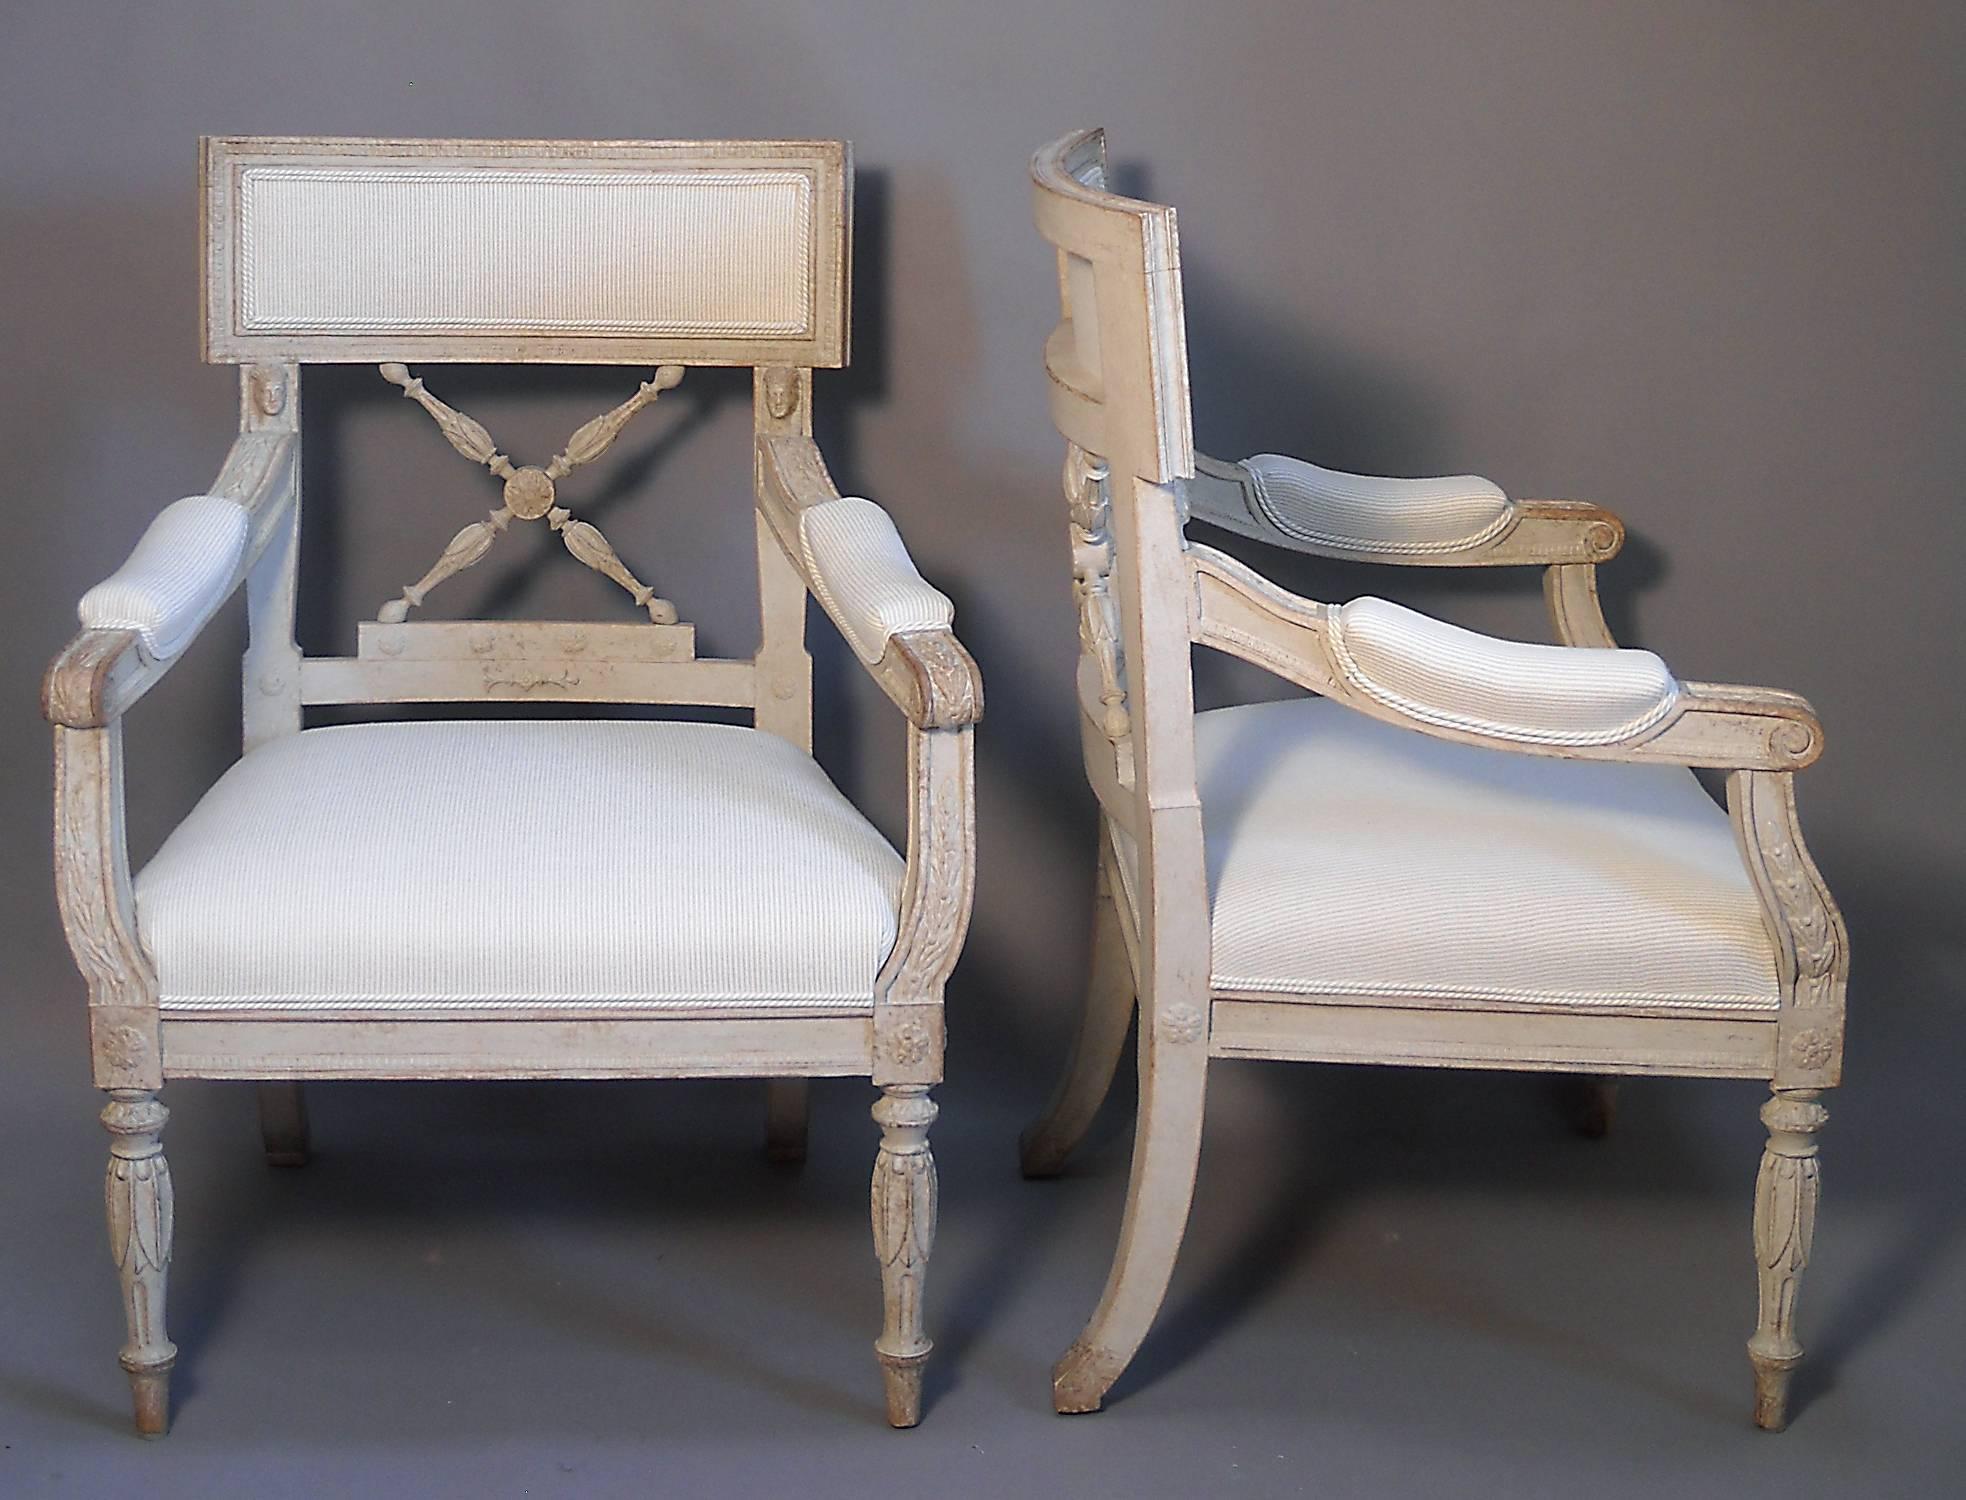 Pair of Swedish armchairs from the Empire period, circa 1860, with upholstered seats and backs. Carved Egyptian motifs include lotus flowers and archaic heads. Excellent original condition with new upholstery.